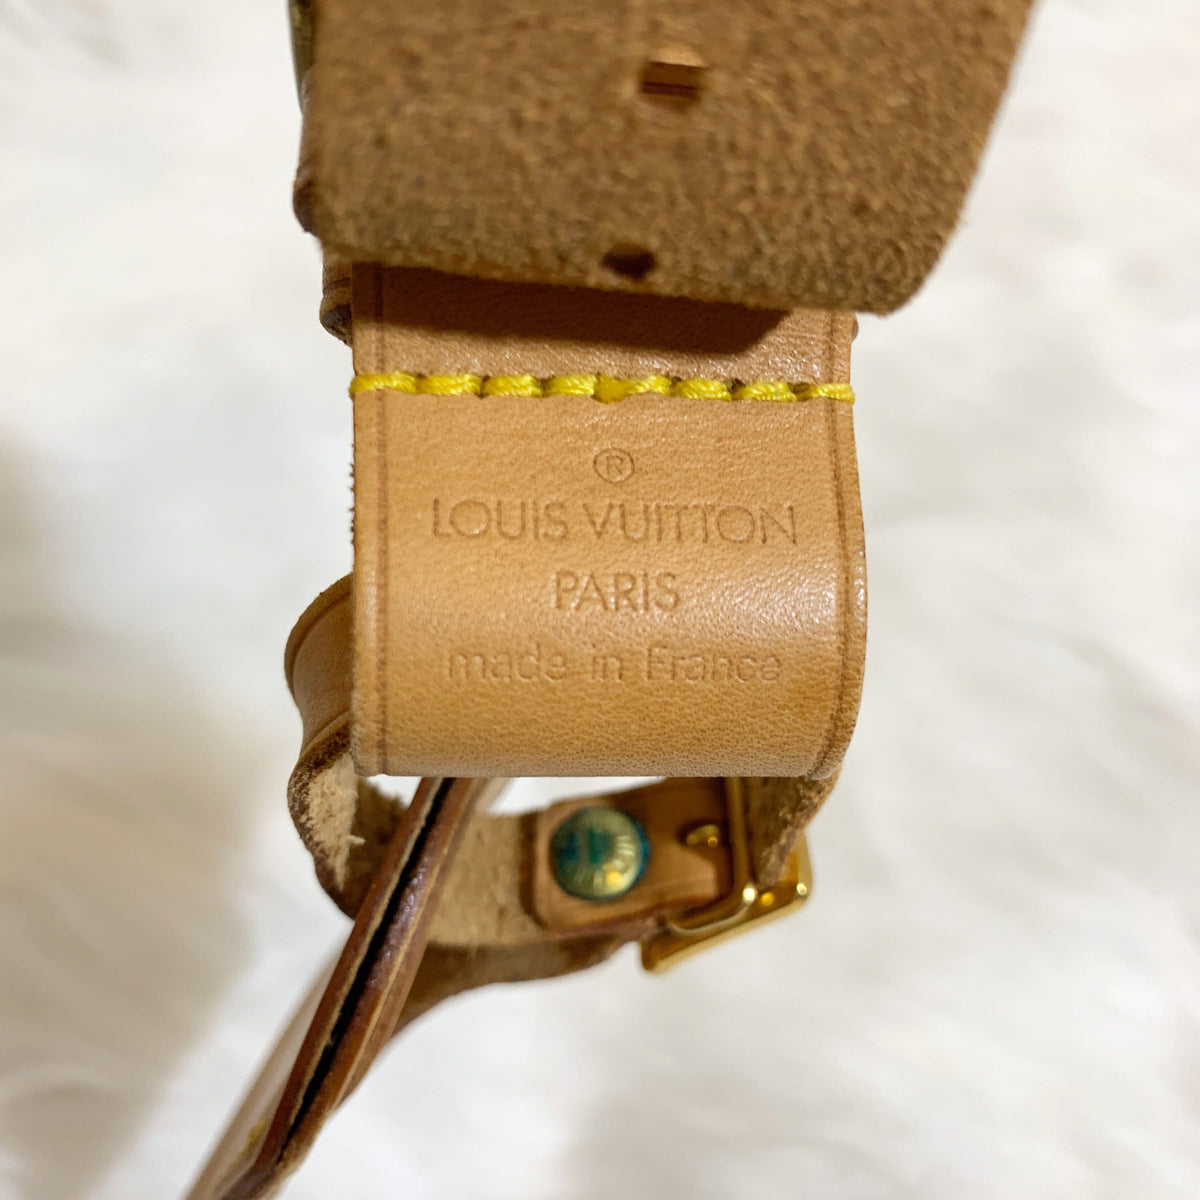 Authentic Louis Vuitton Name Tag “Restored Leather” Small - France